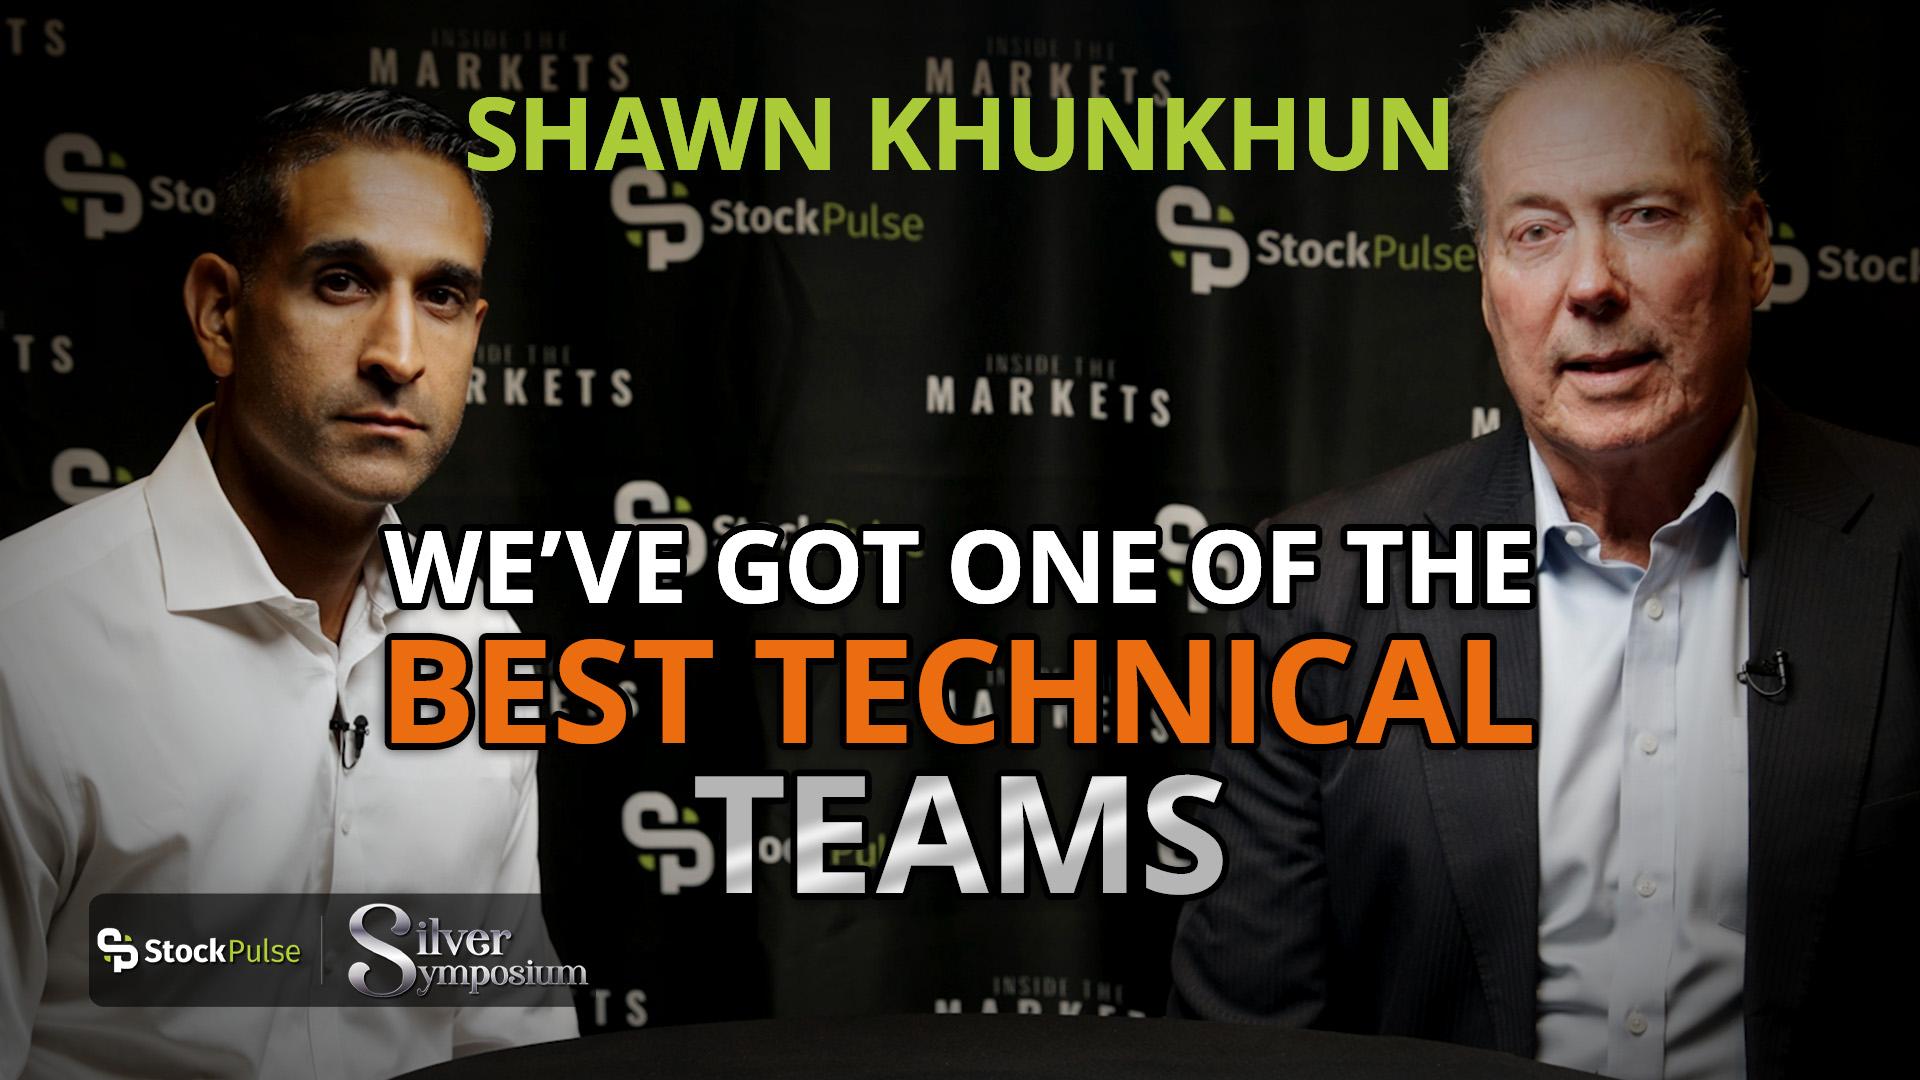 Shawn Khunkhun: We’ve Got One of the Best Technical Teams